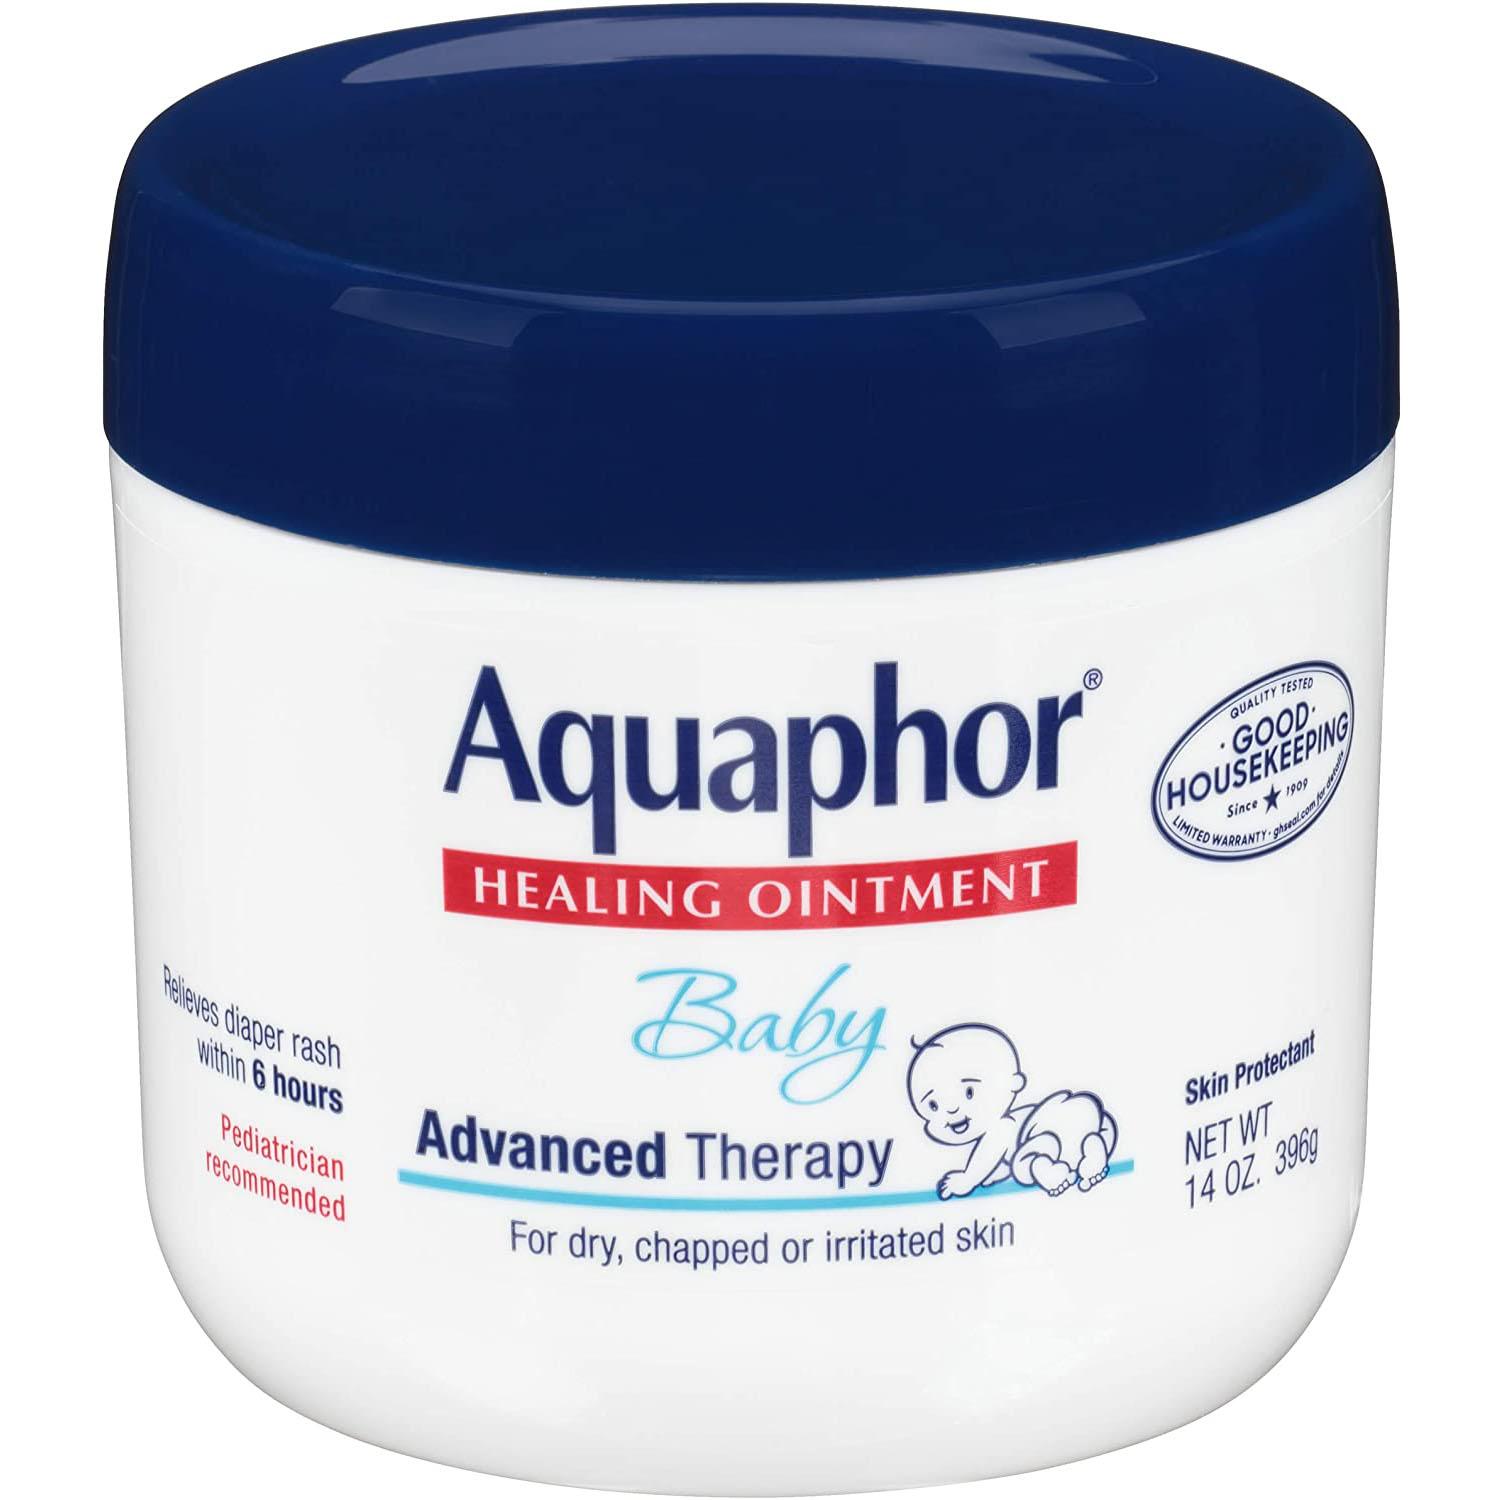 Aquaphor Baby Healing Ointment for $9.14 Shipped